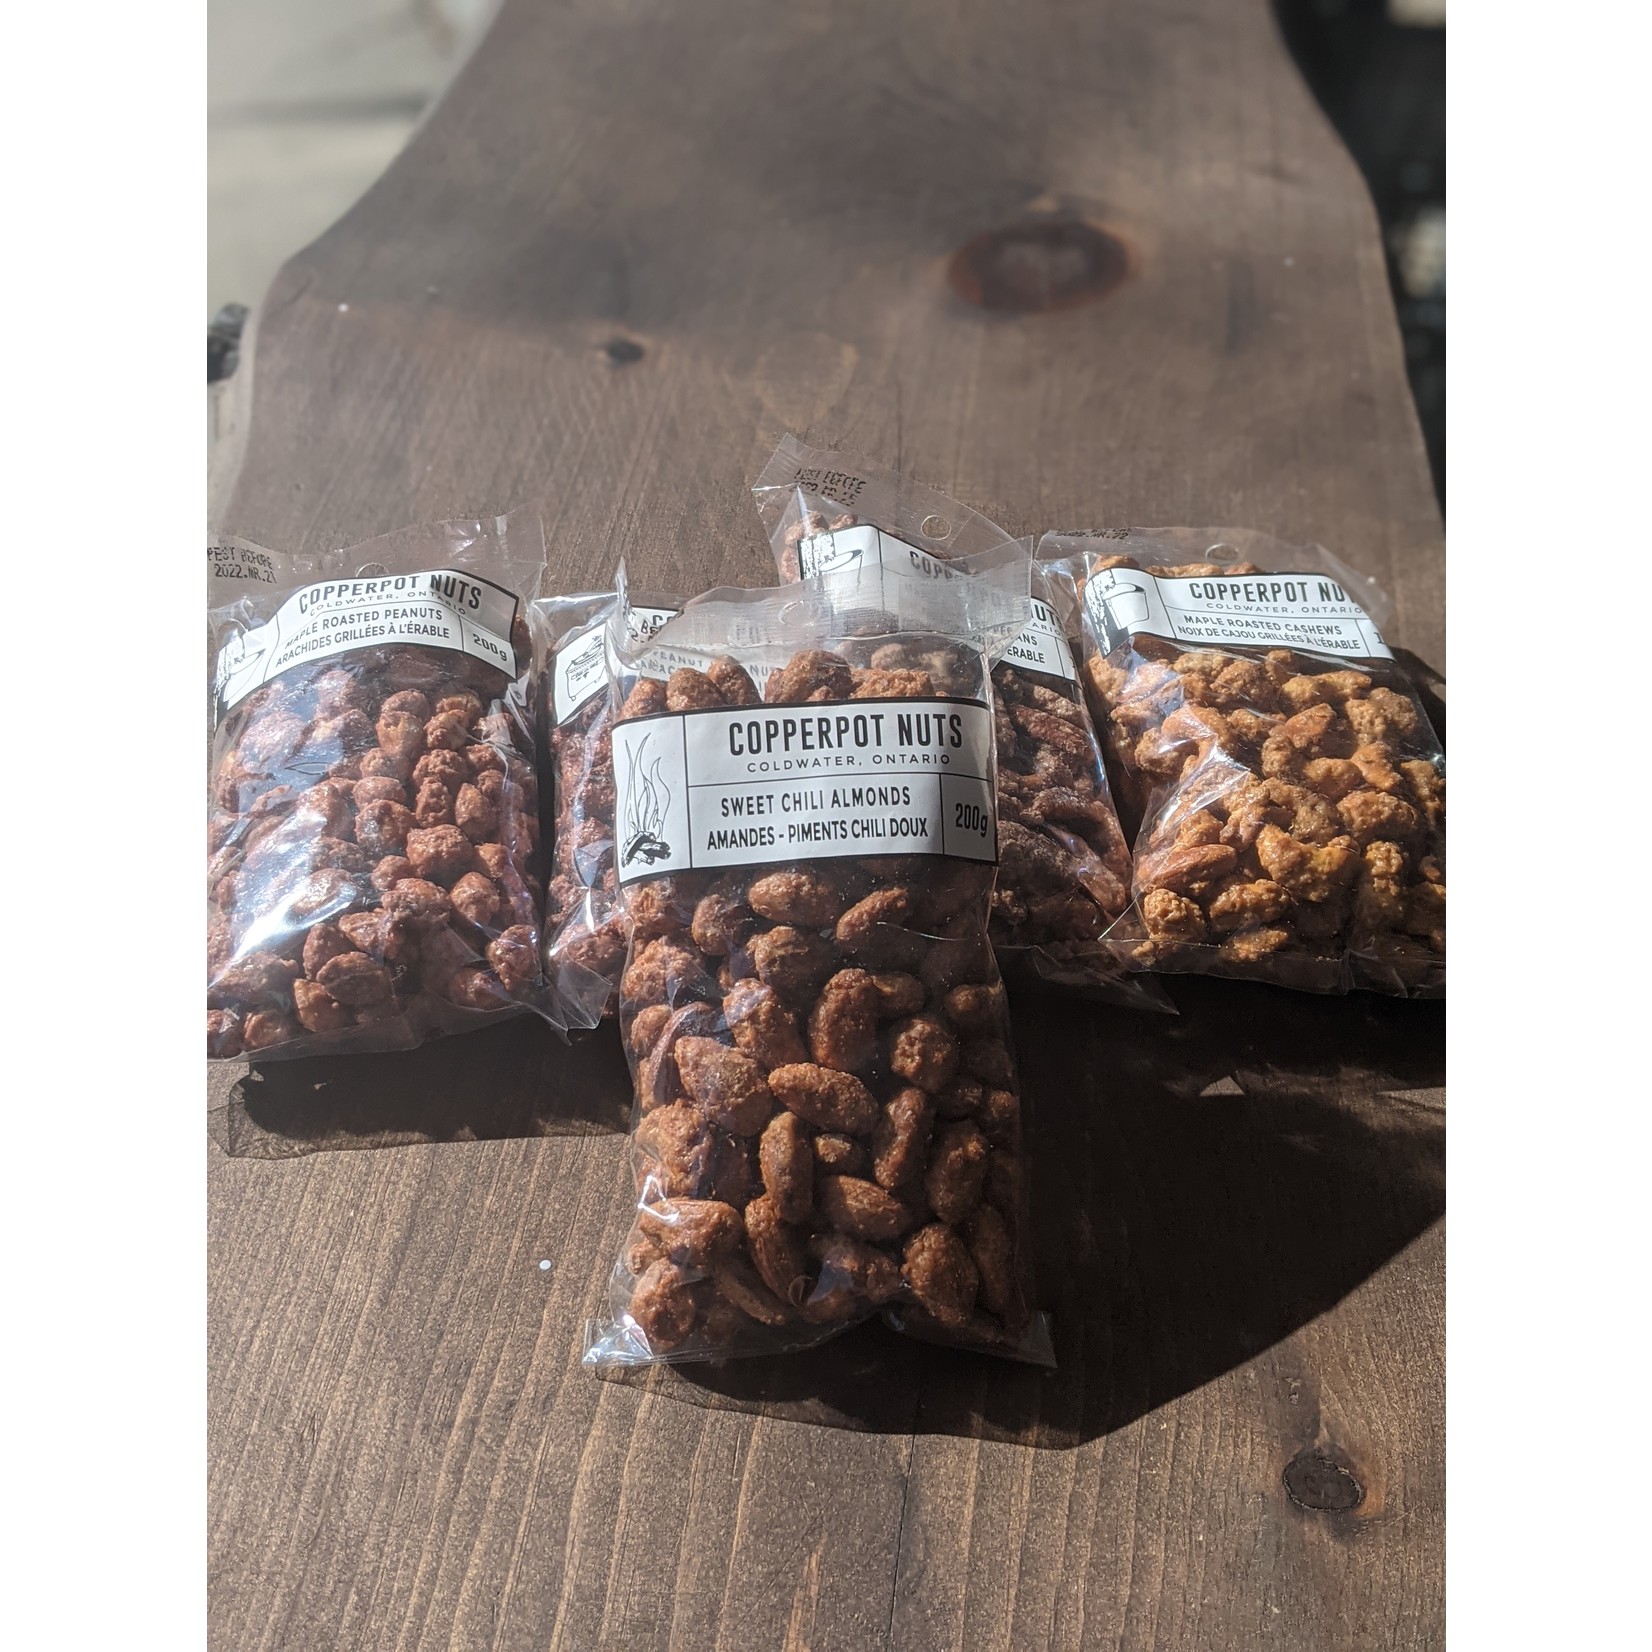 COPPERPOT NUTS COPPERPOT NUTS SWEET CHILI ALMONDS